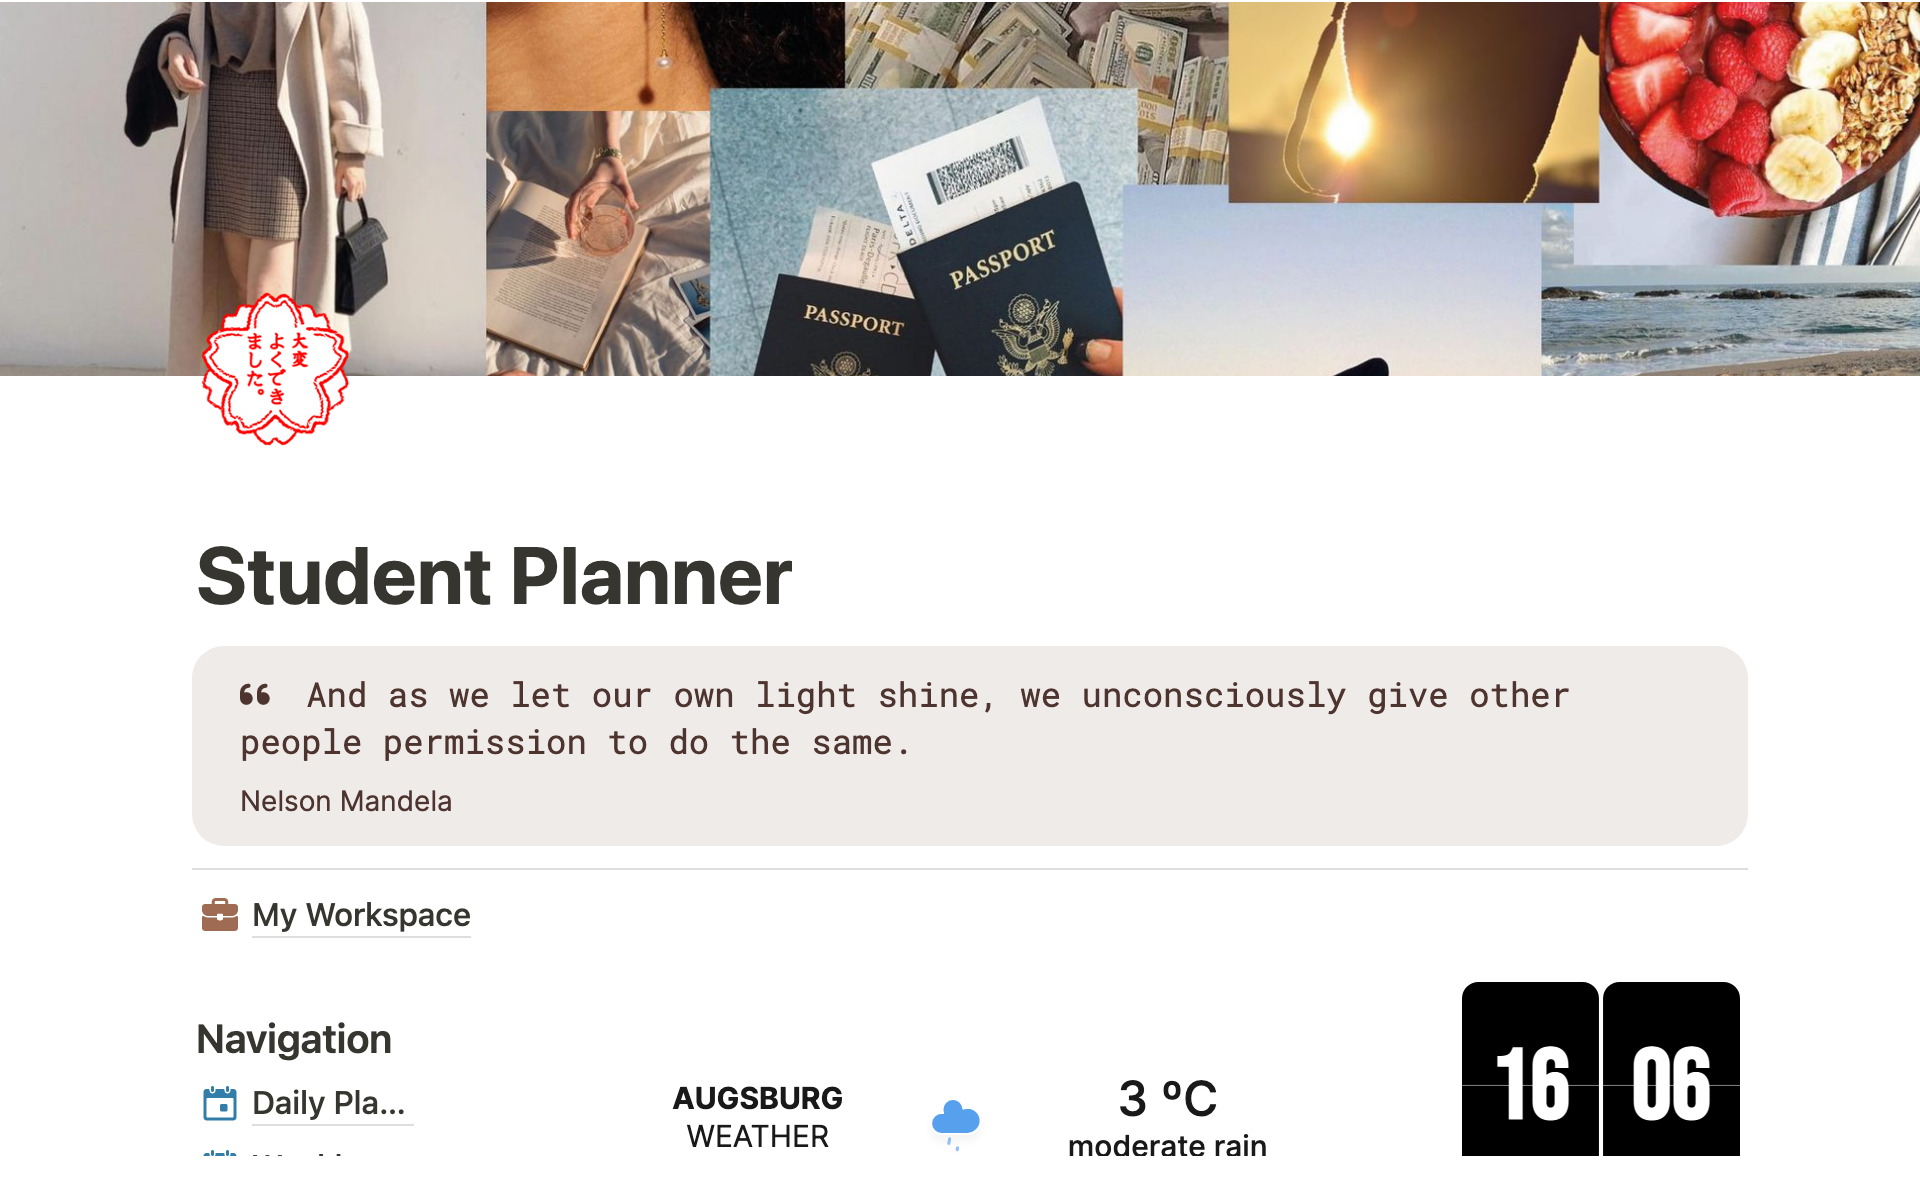 A personal planner to help you organise your life easily and in an efficient way